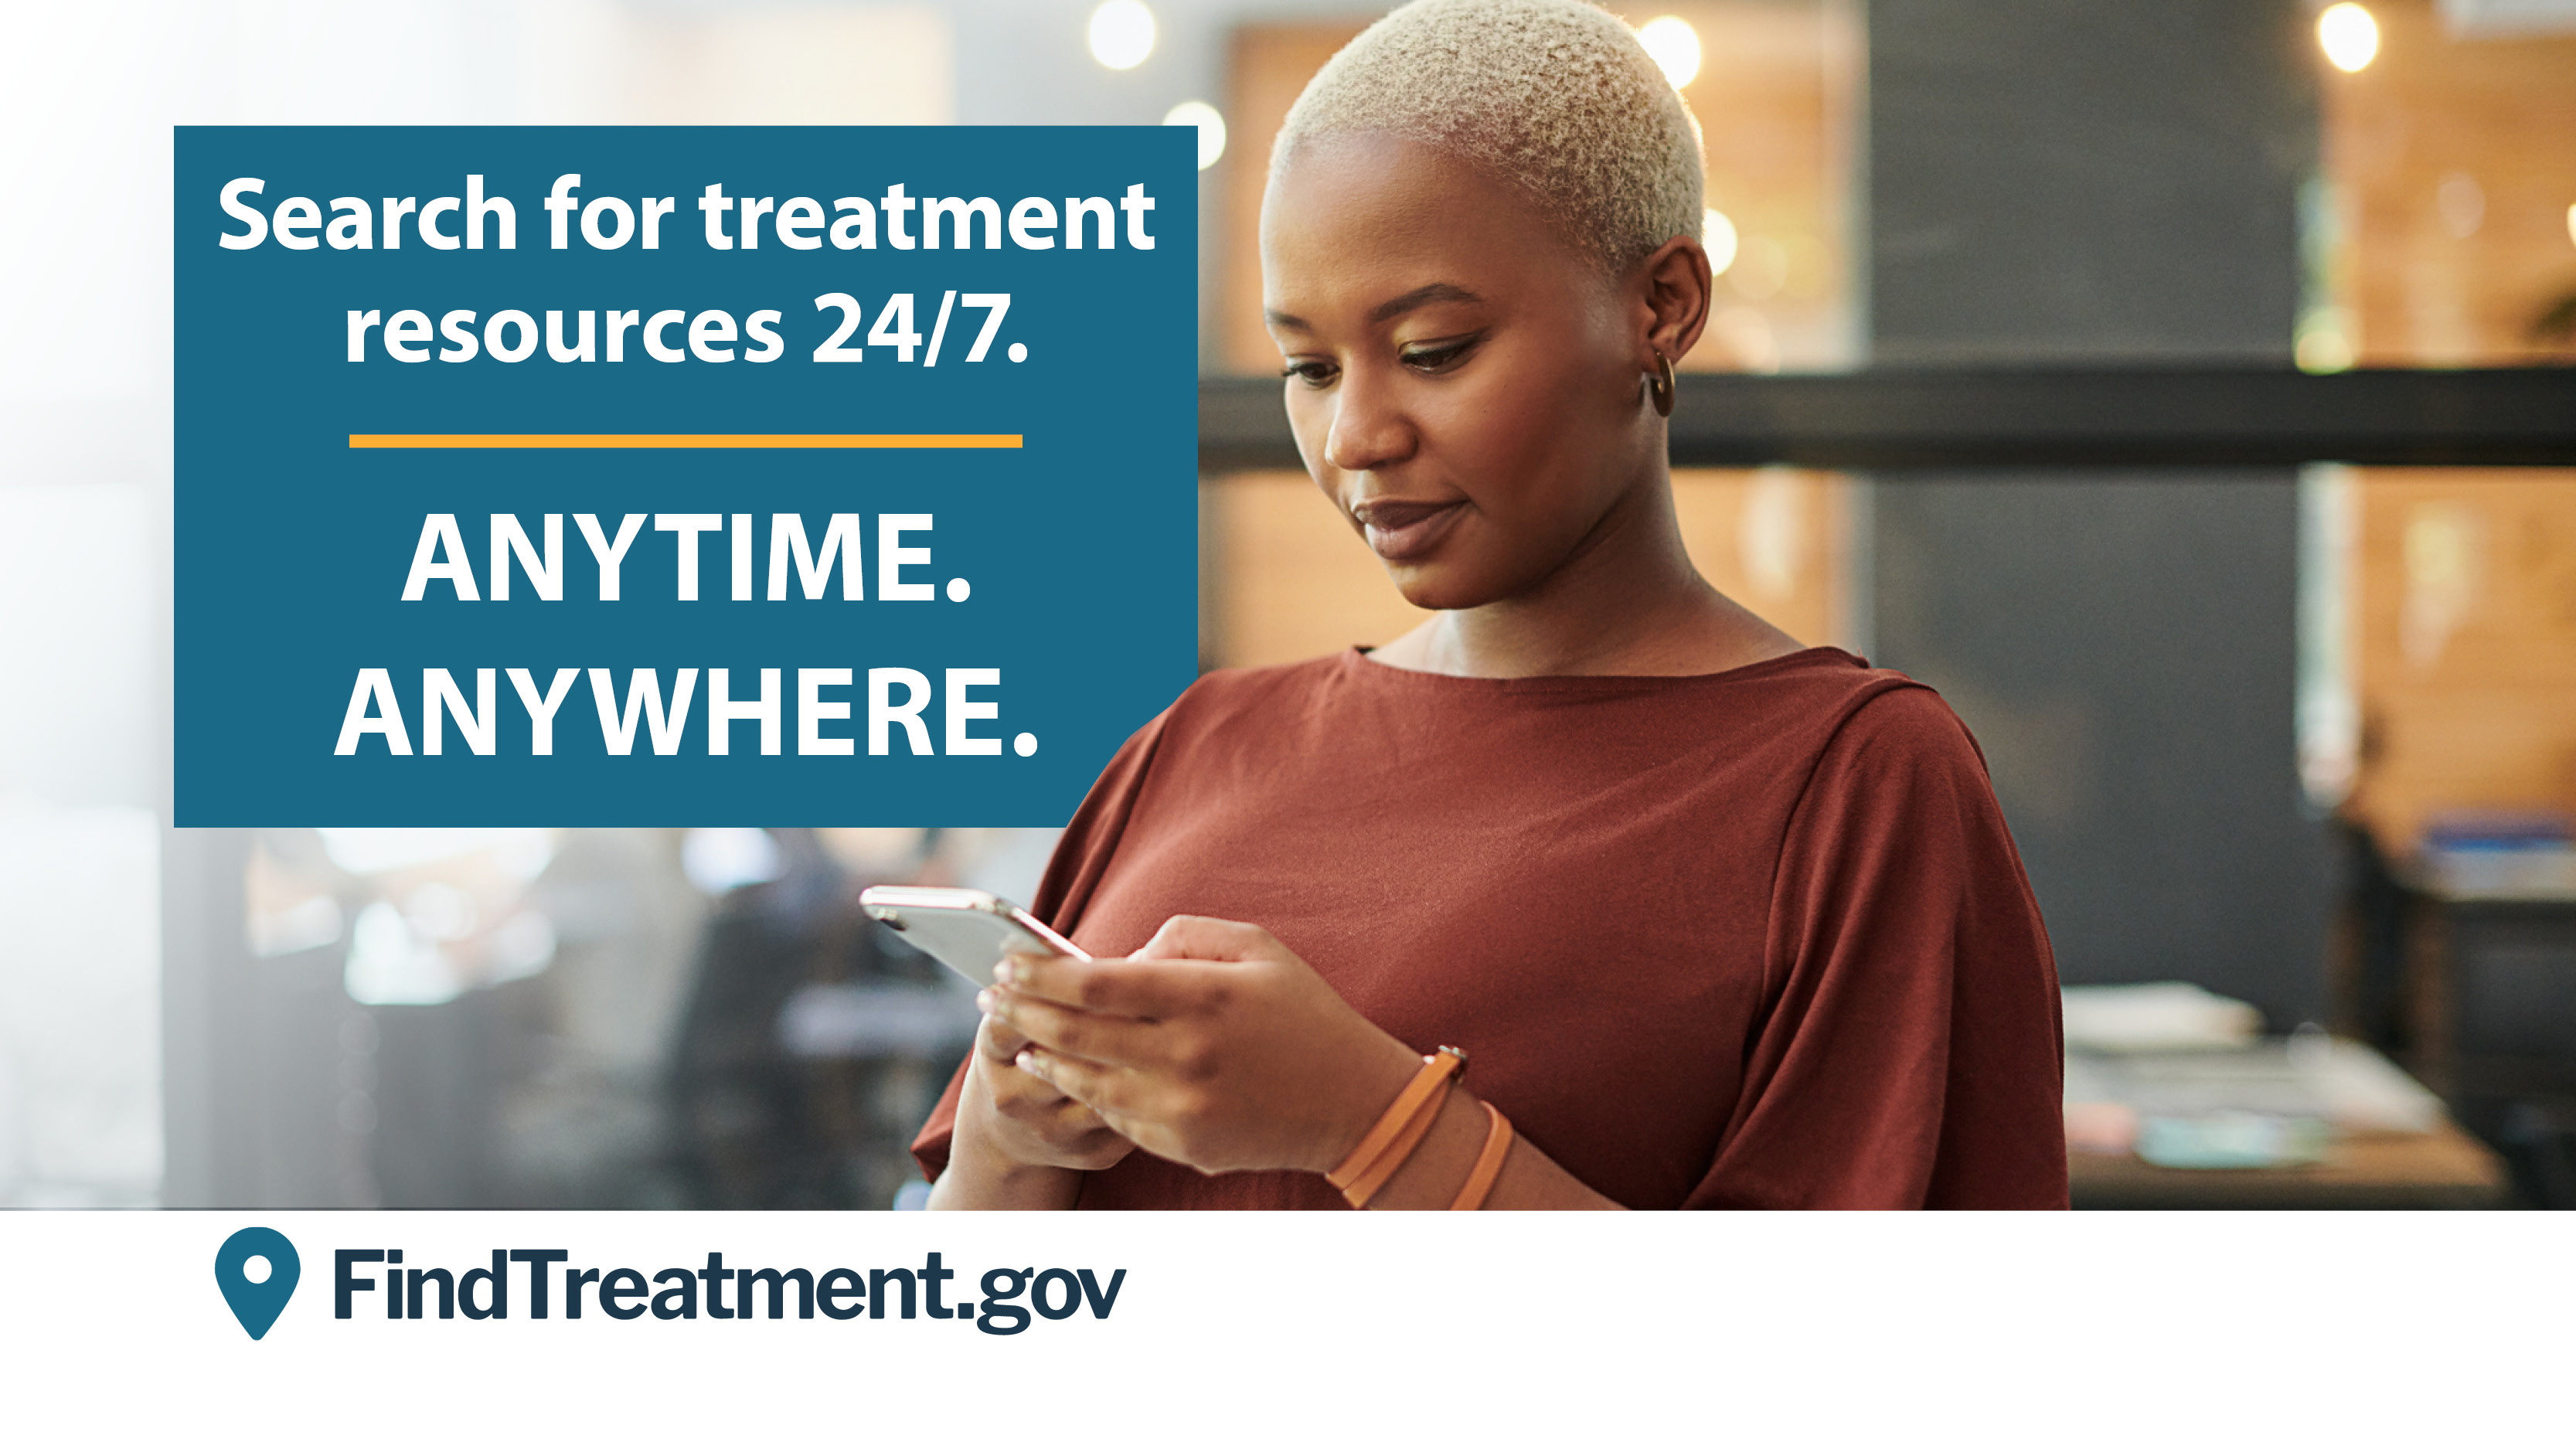 Woman looking down at the mobile phone. The text reads, "Search for treatment resources 24/7. Anytime. Anywhere." Below the text is the FindTreatment.gov logo.